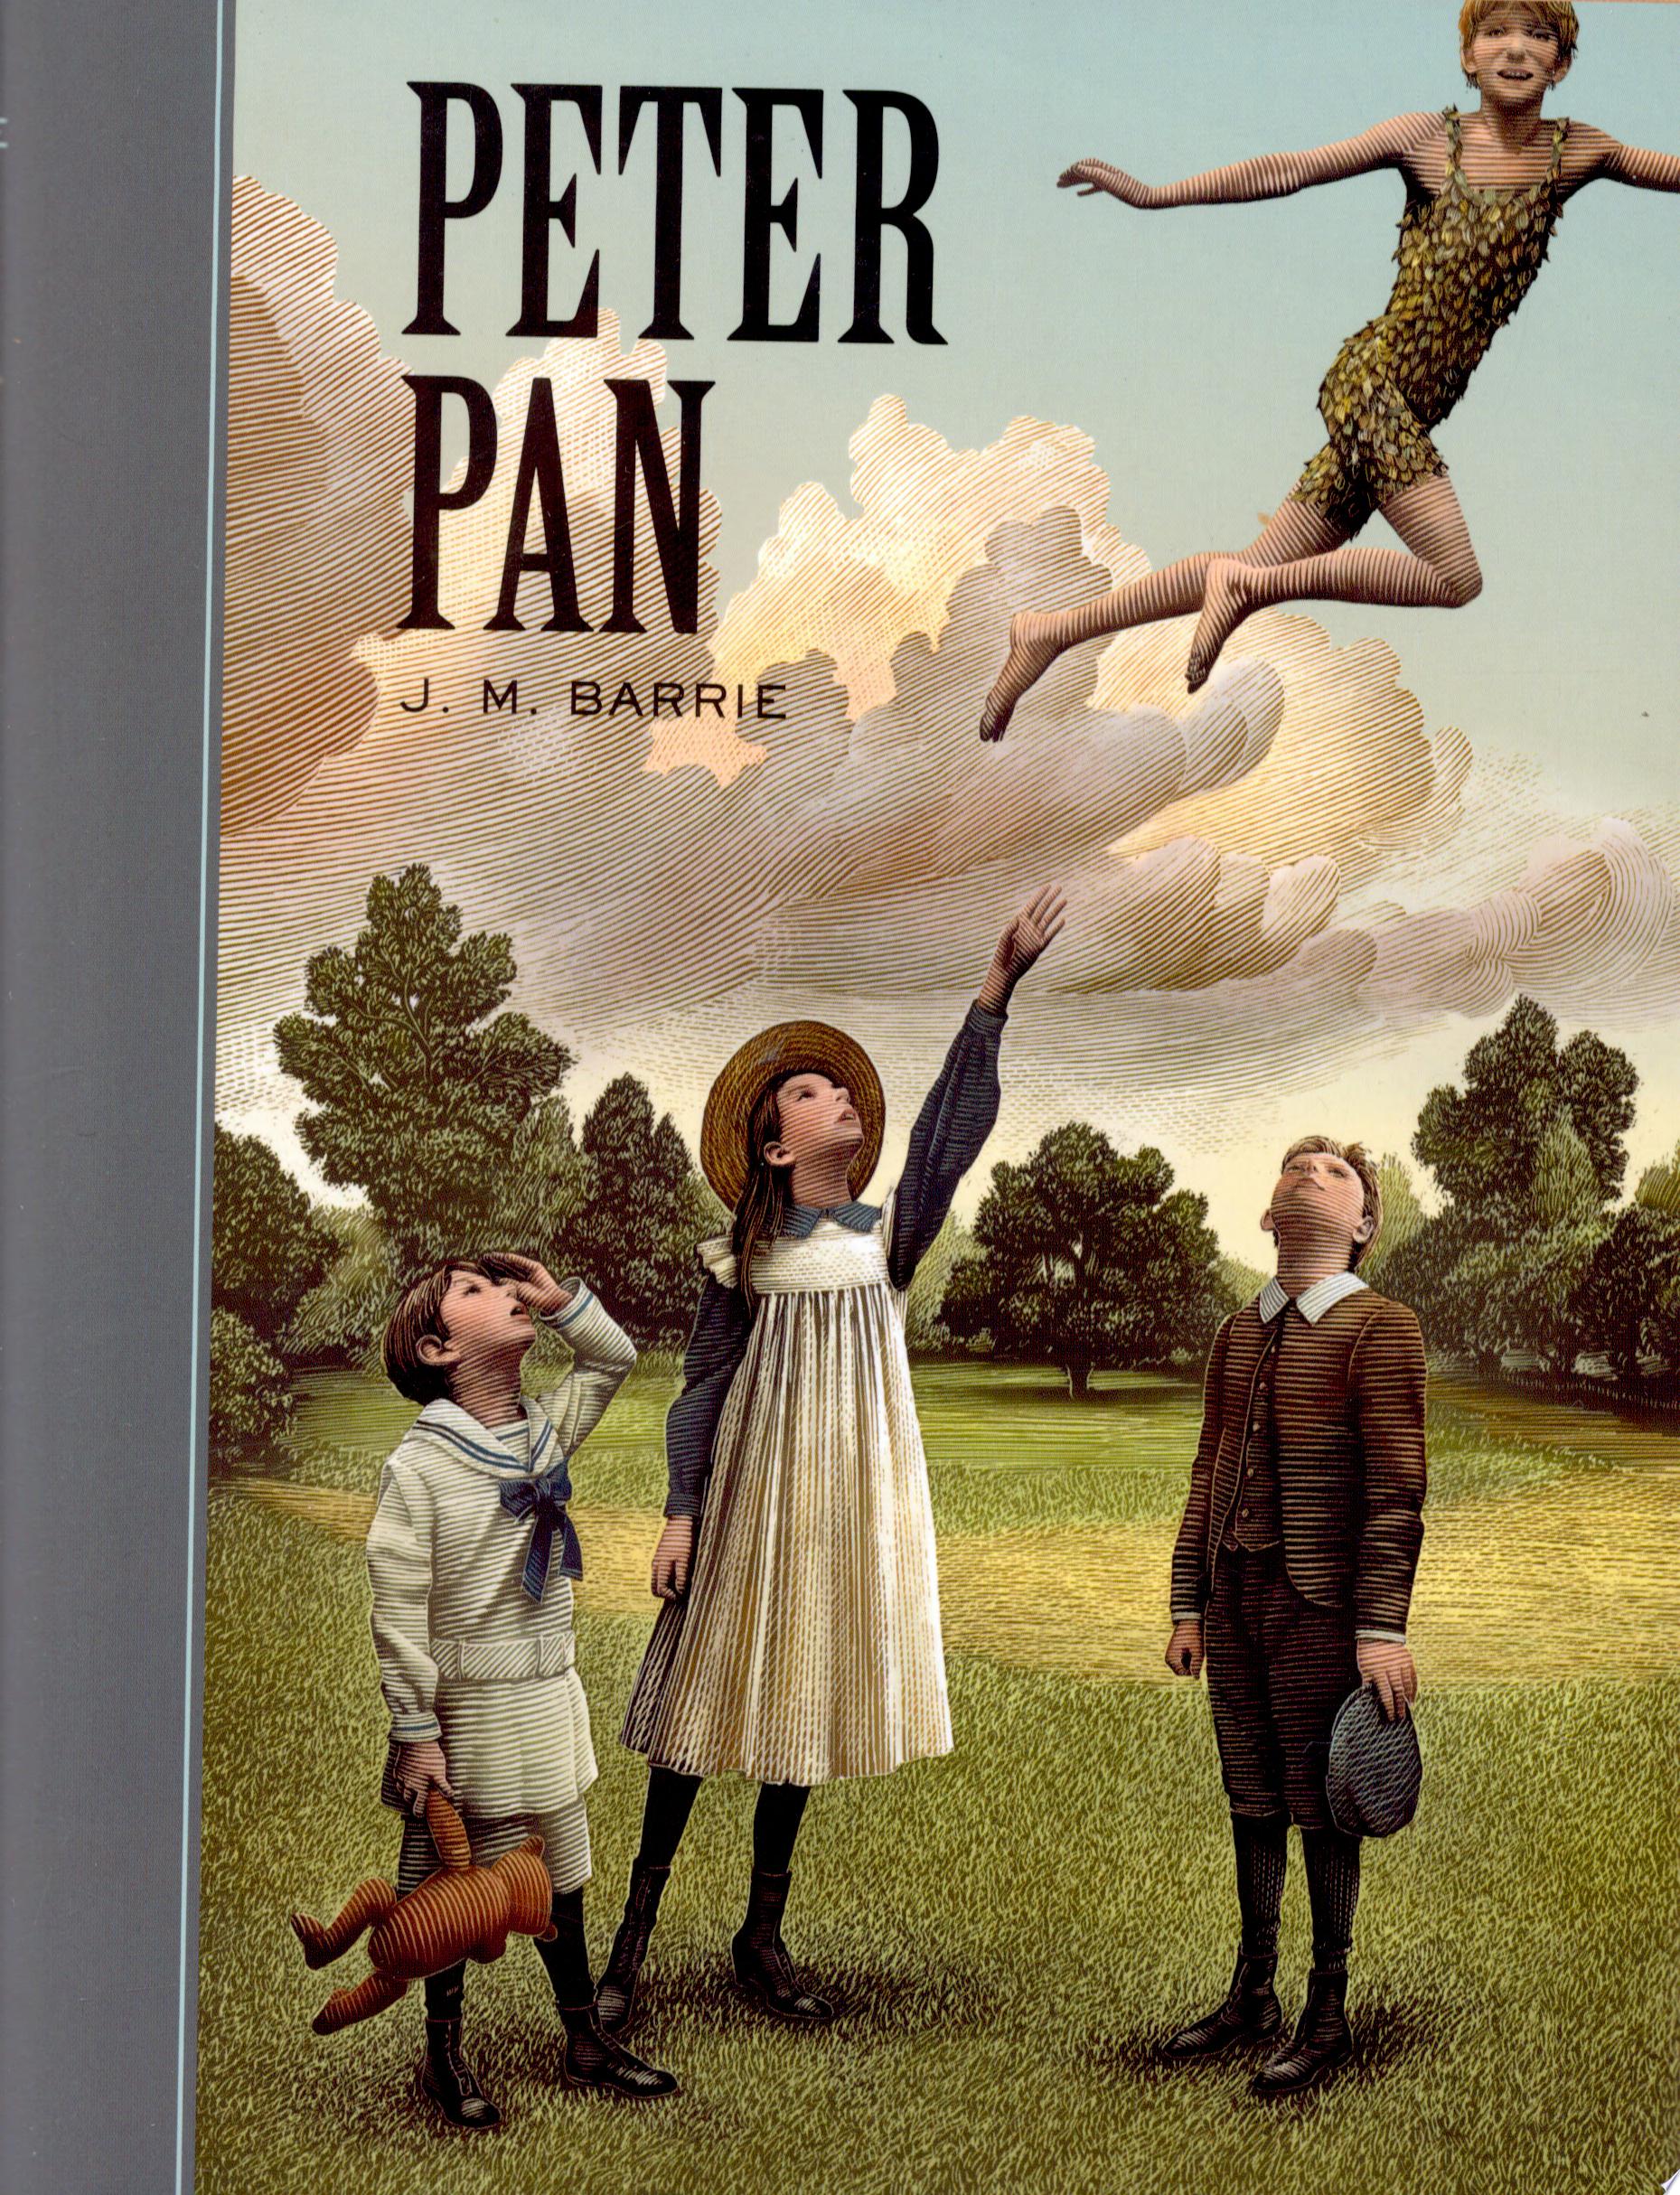 Image for "Peter Pan"